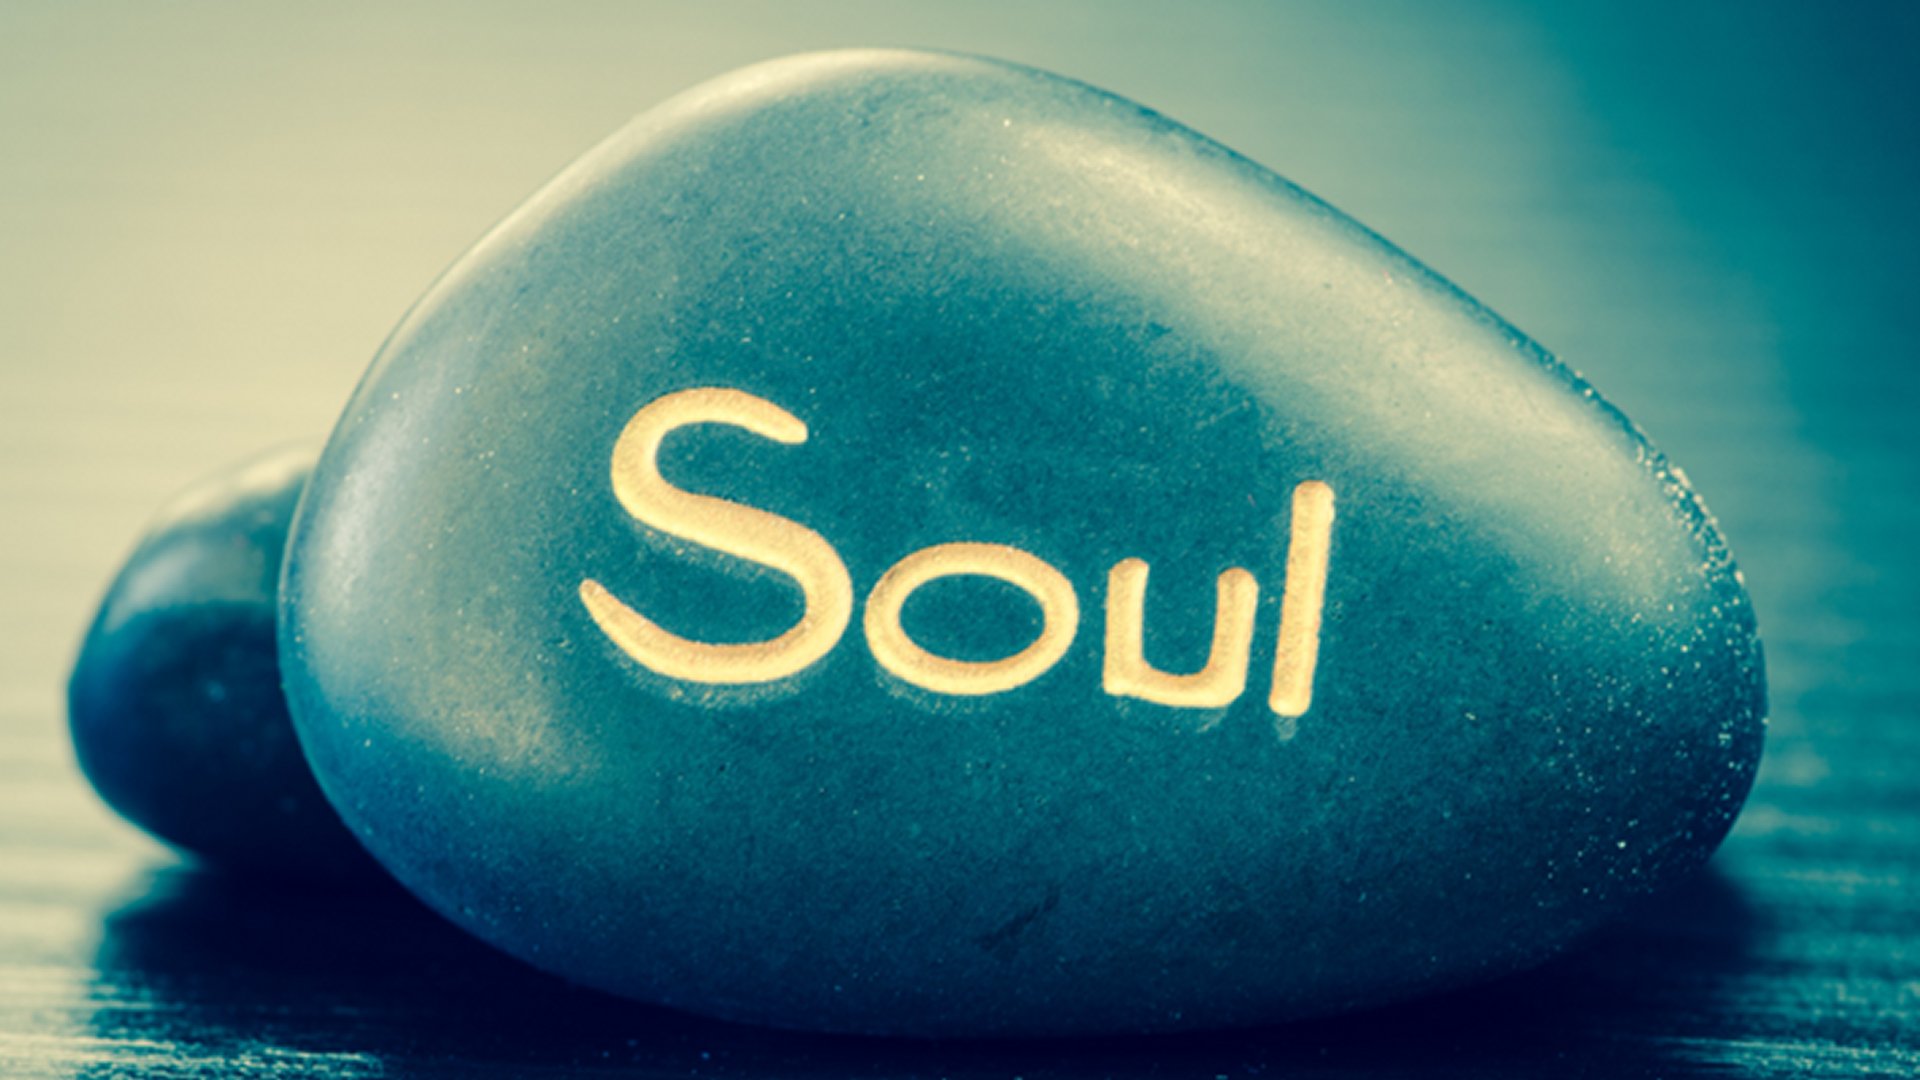 What Feeds Your Soul